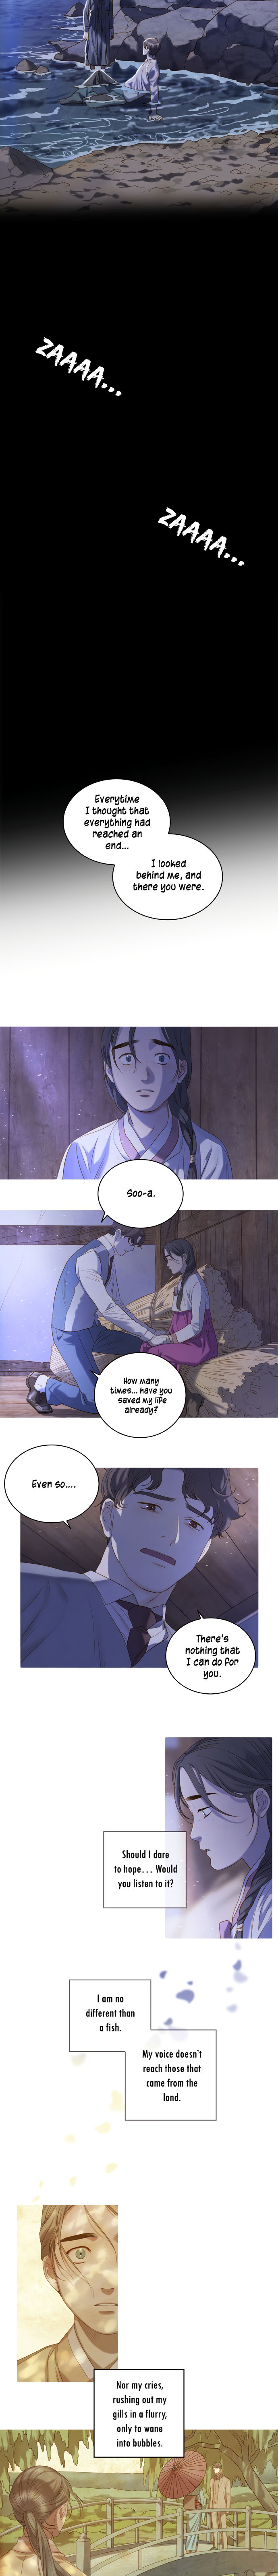 Gorae Byul - The Gyeongseong Mermaid - Chapter 0 Page 3